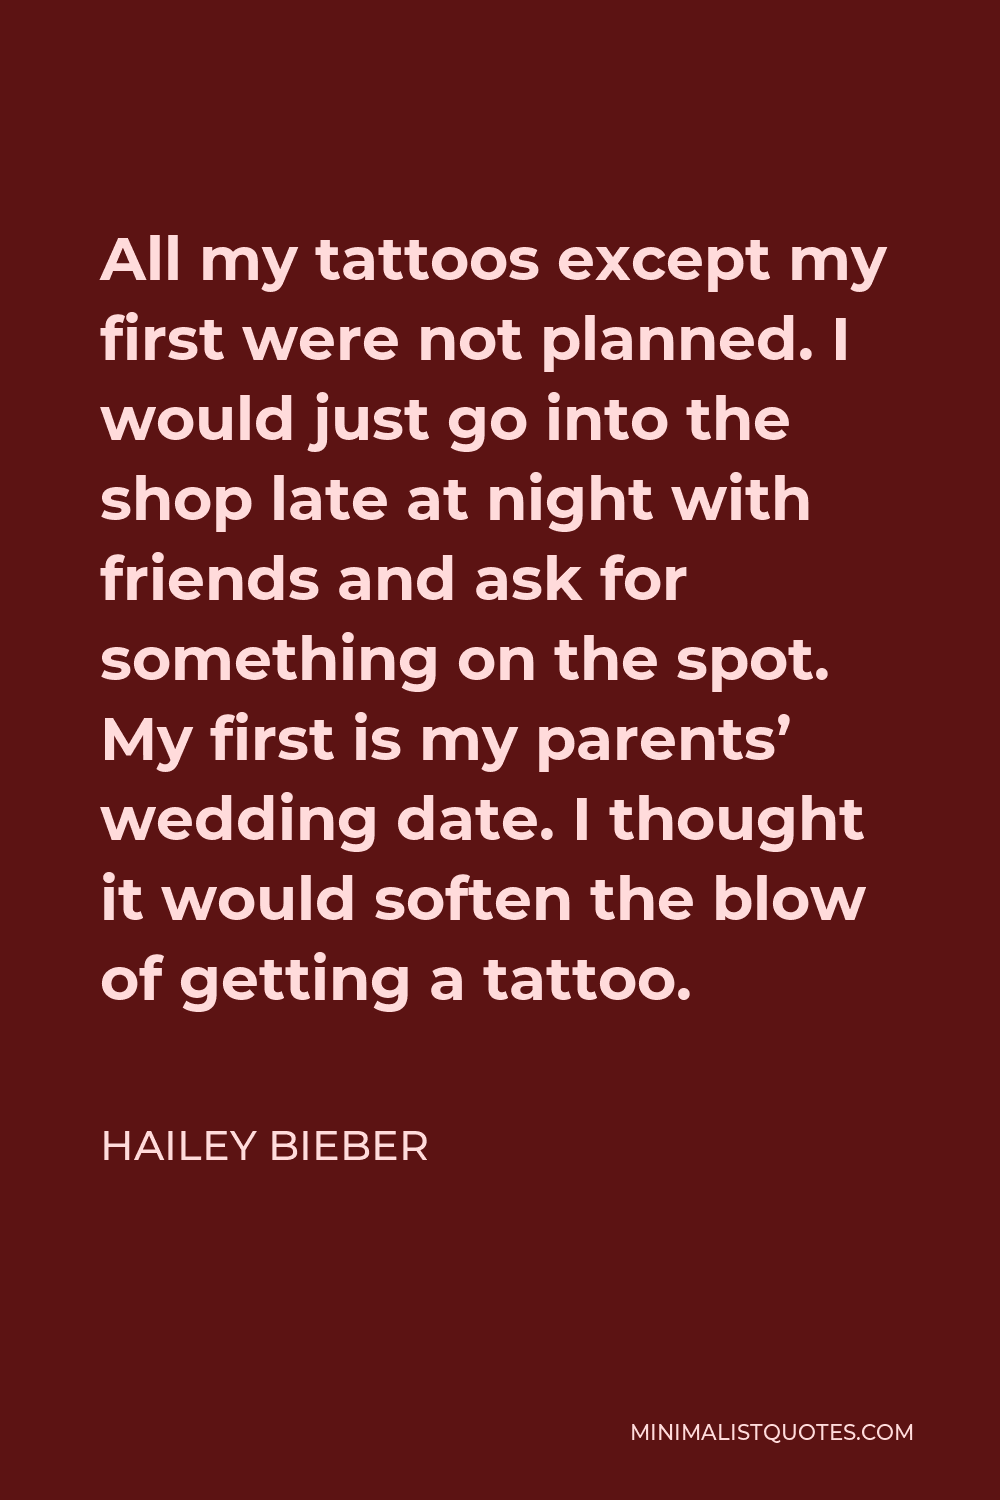 Hailey Bieber Quote: All my tattoos except my first were not planned. I  would just go into the shop late at night with friends and ask for  something on the spot. My